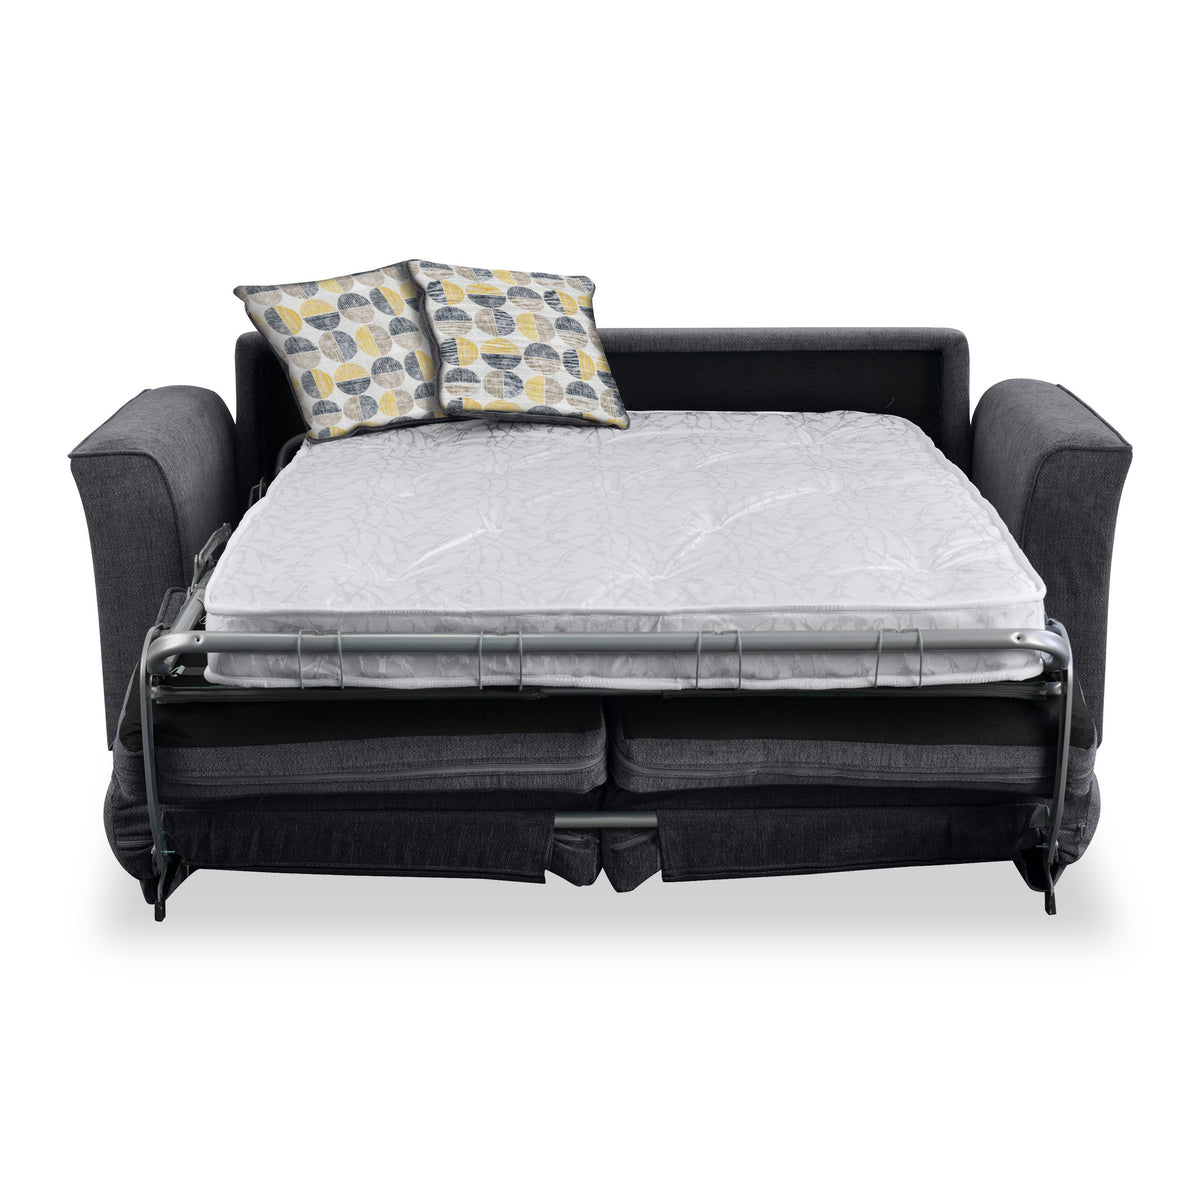 Abbott 2 Seater Sofabed in Charcoal with Rufus Beige Cushions by Roseland Furniture